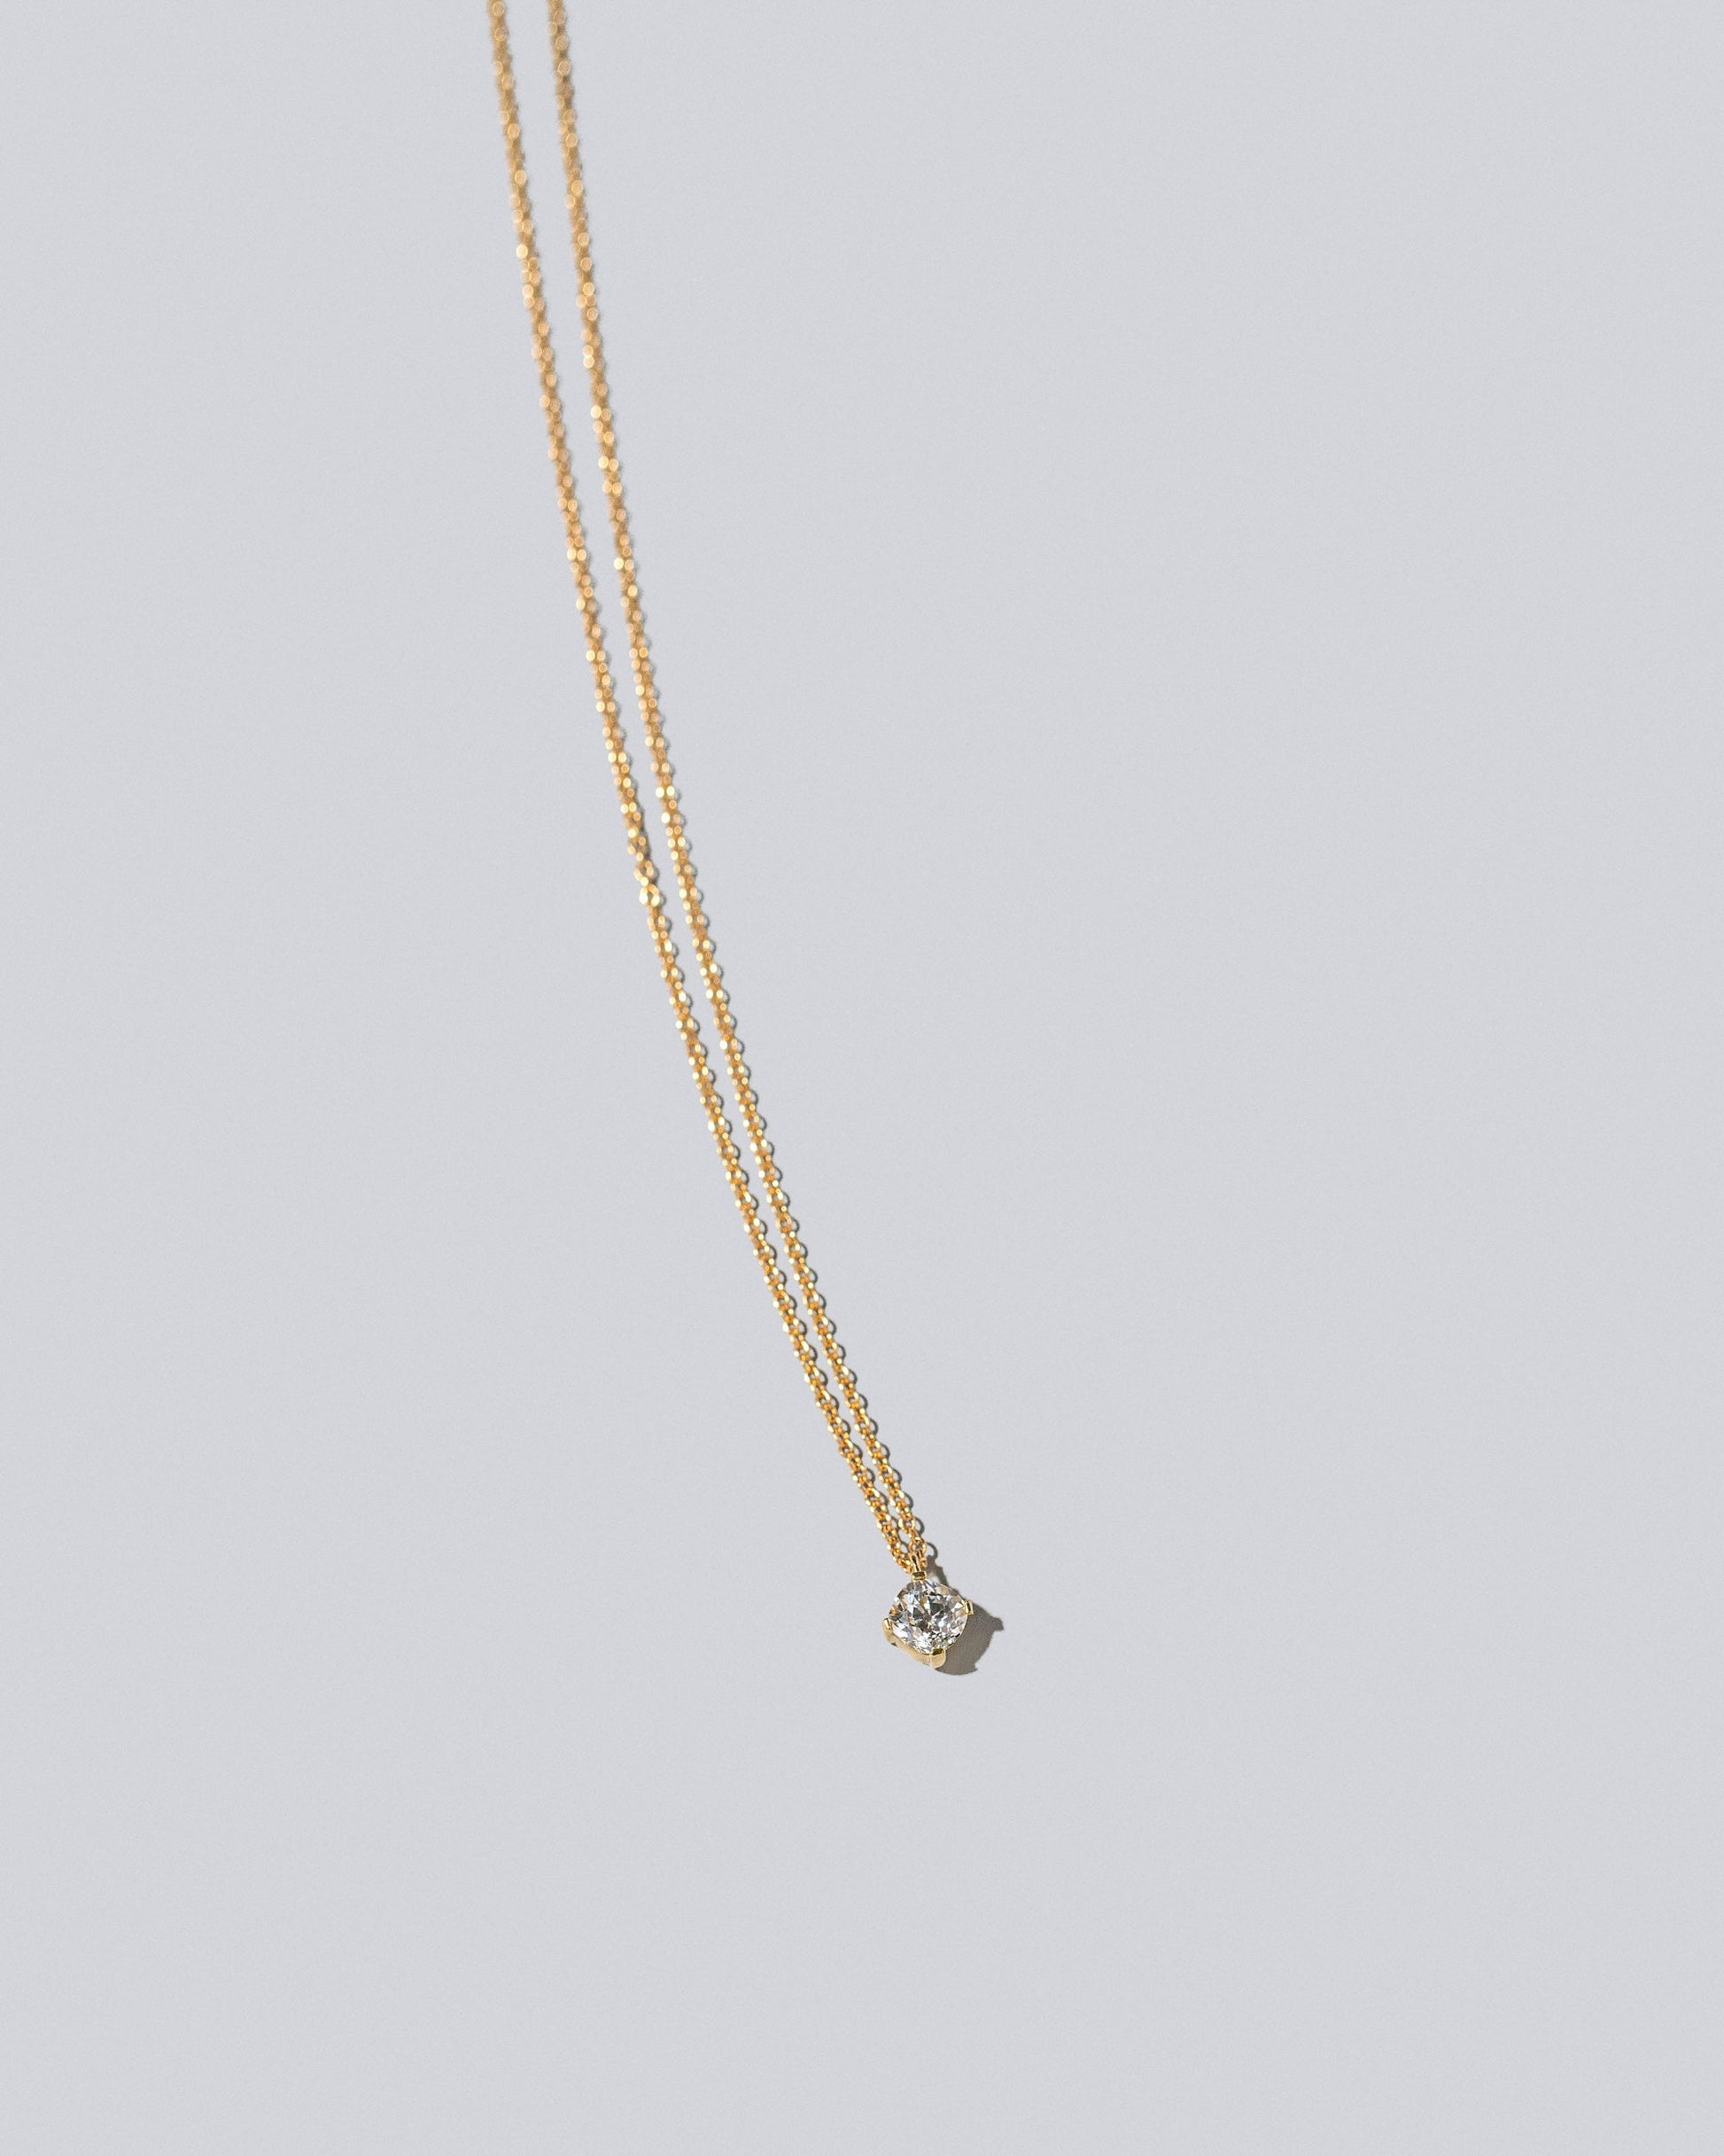 Product photo of Octave Necklace on light background